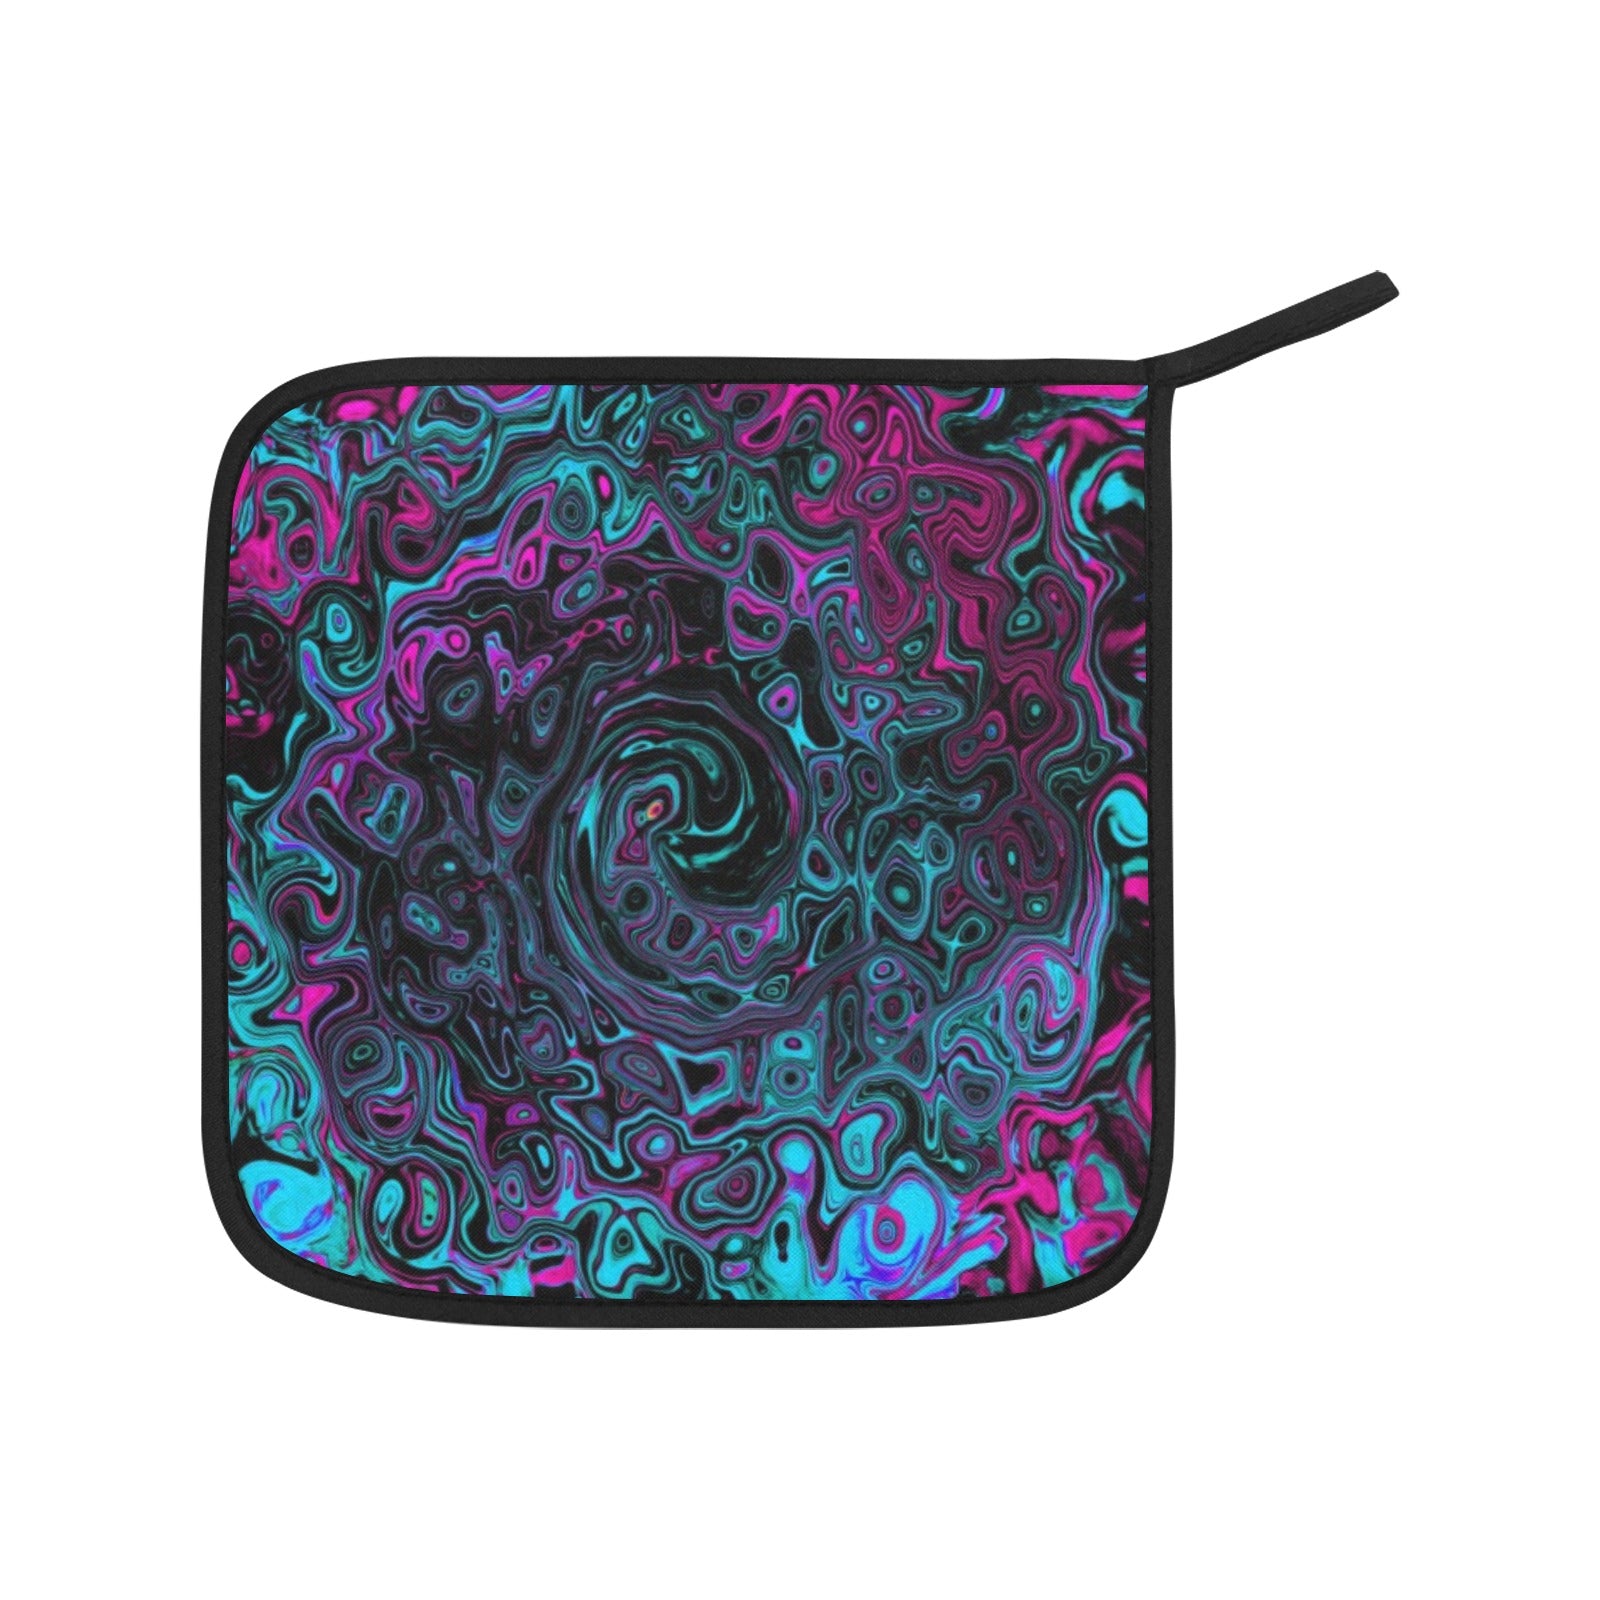 Oven Mitts and Pot Holders Set, Retro Aqua Magenta and Black Abstract Swirl